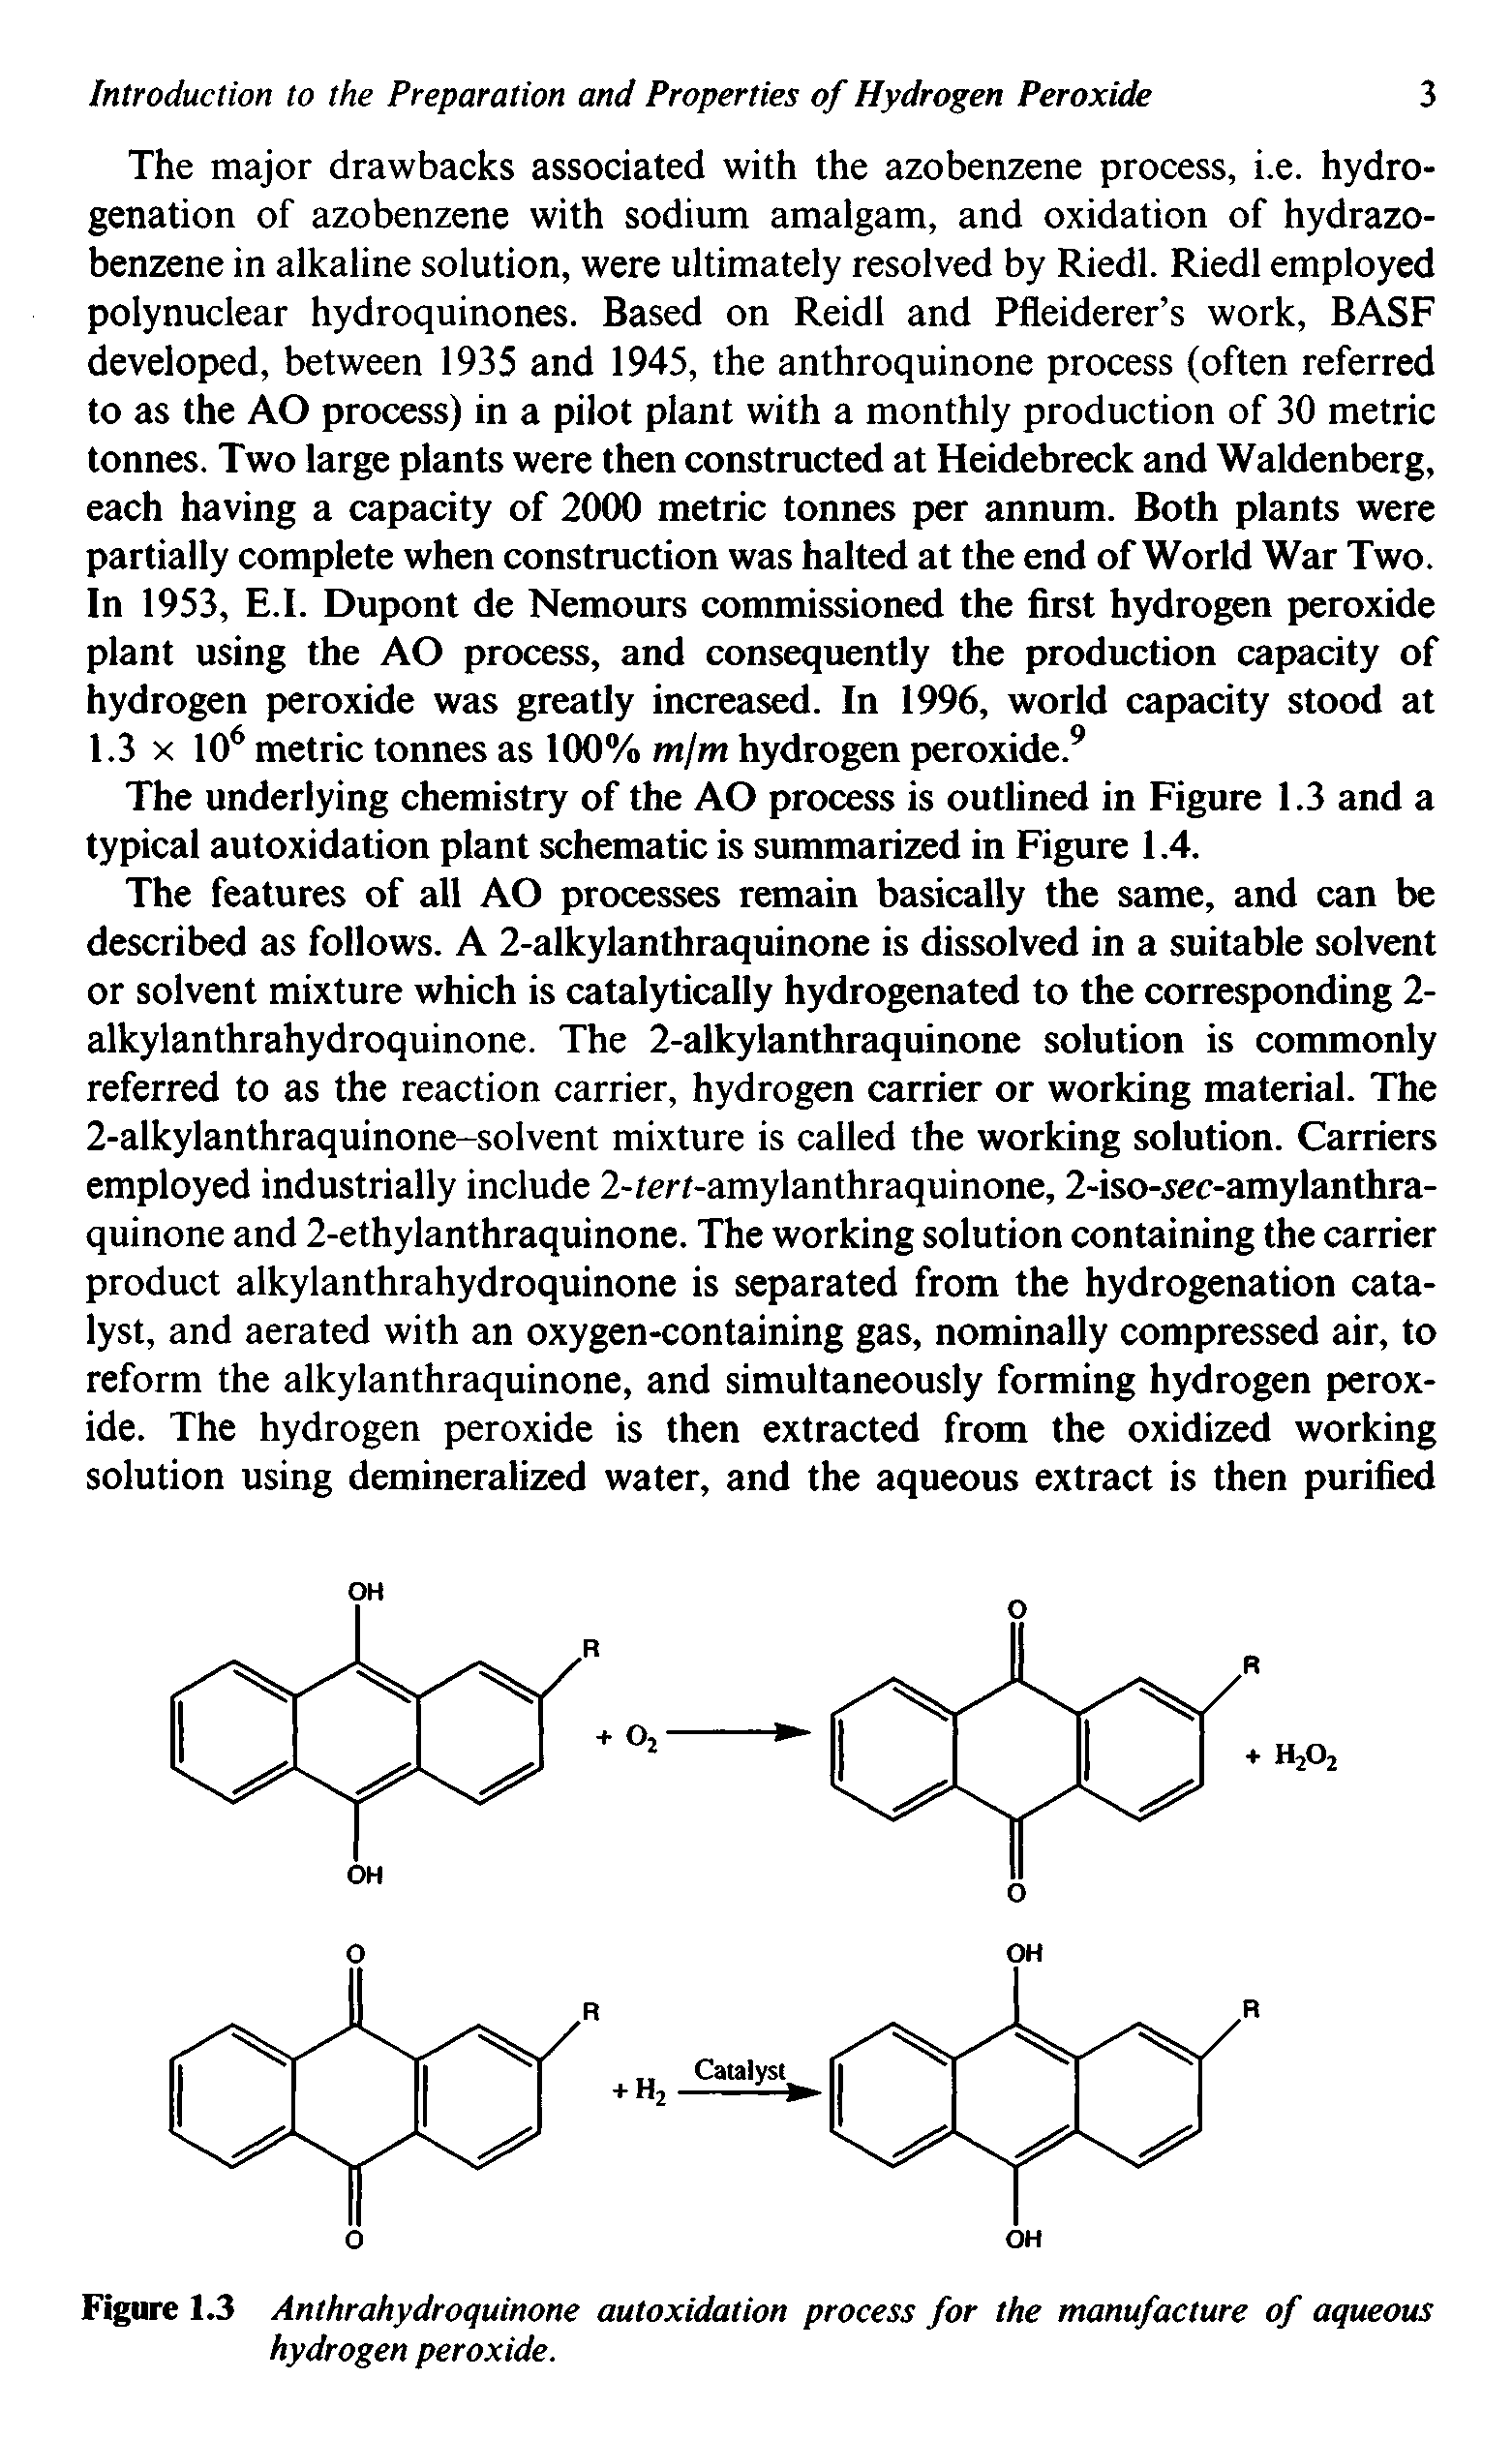 Figure 1.3 Anthrahydroquinone autoxidation process for the manufacture of aqueous hydrogen peroxide.